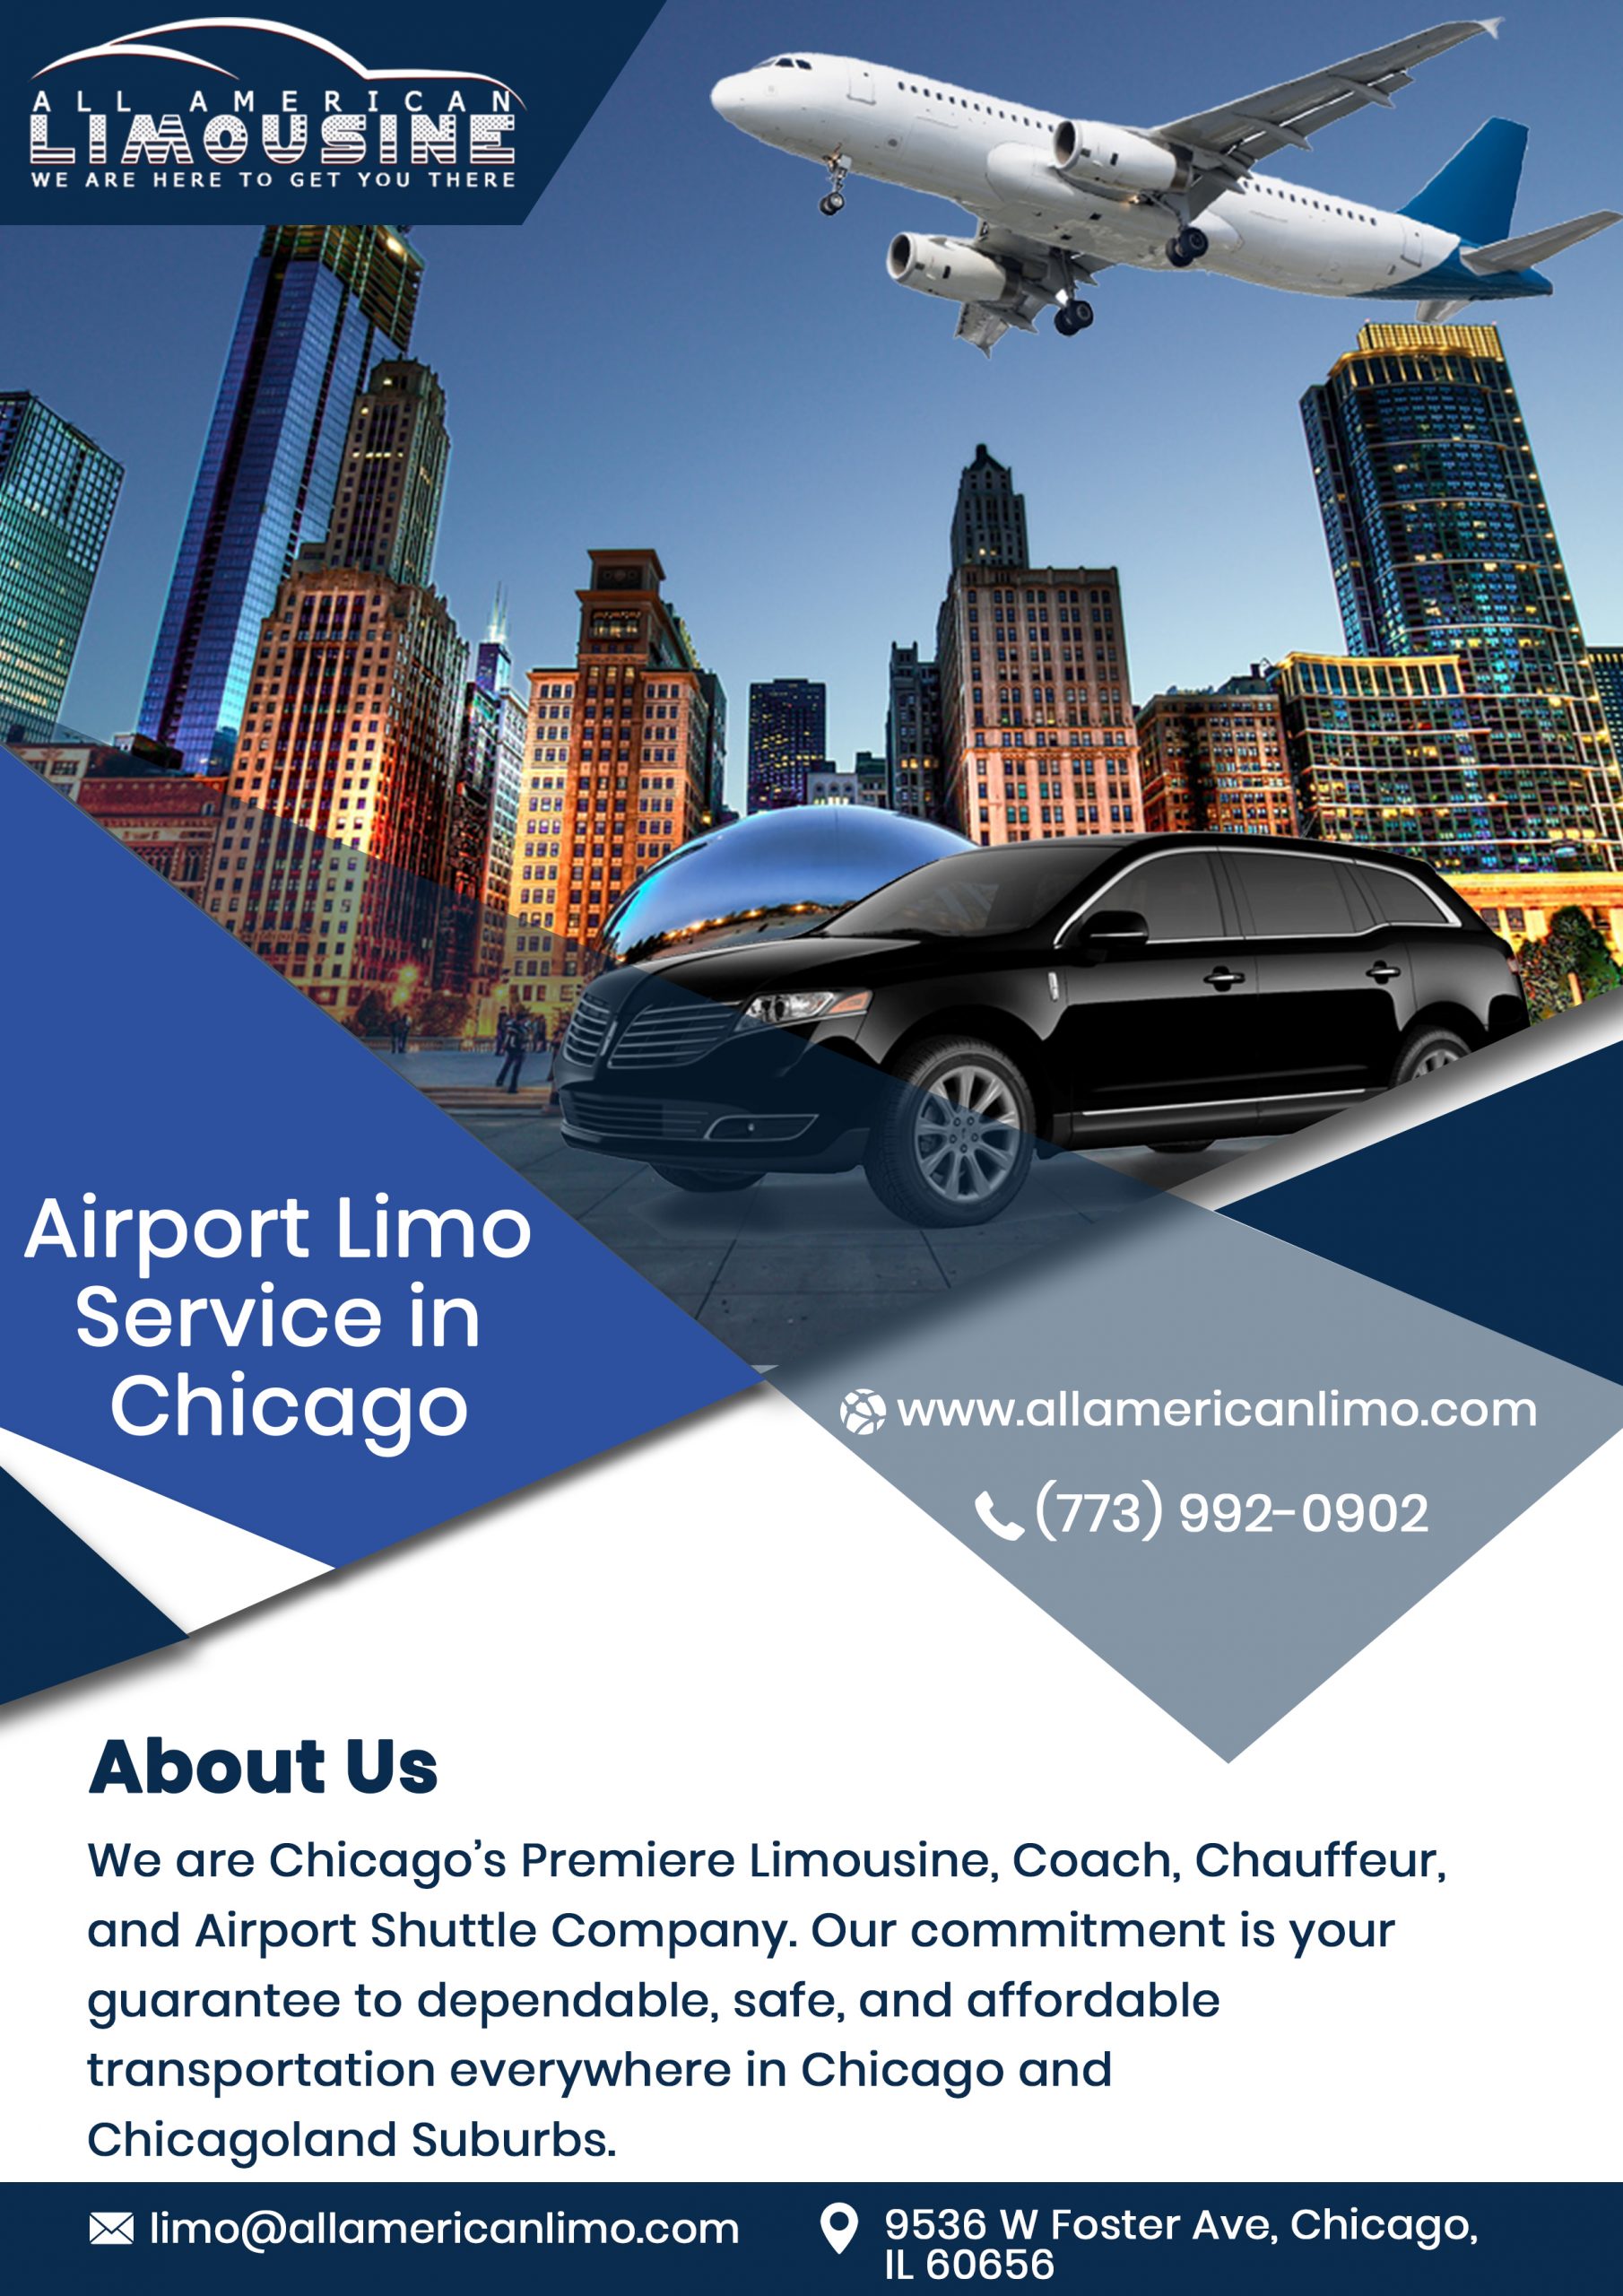 Chicago Car Service Near Me 60631, Party Bus 60631, Mercedes Sprinter Limo to 60631, Chicago Limo 60631, Limo Service 60631 to Airport, Hire, Rent, Get, Find, Car Service 60631 to Airport, Transportation Service 60631 to O'Hare, Corporate Travel 60631, Airport Travel 60631